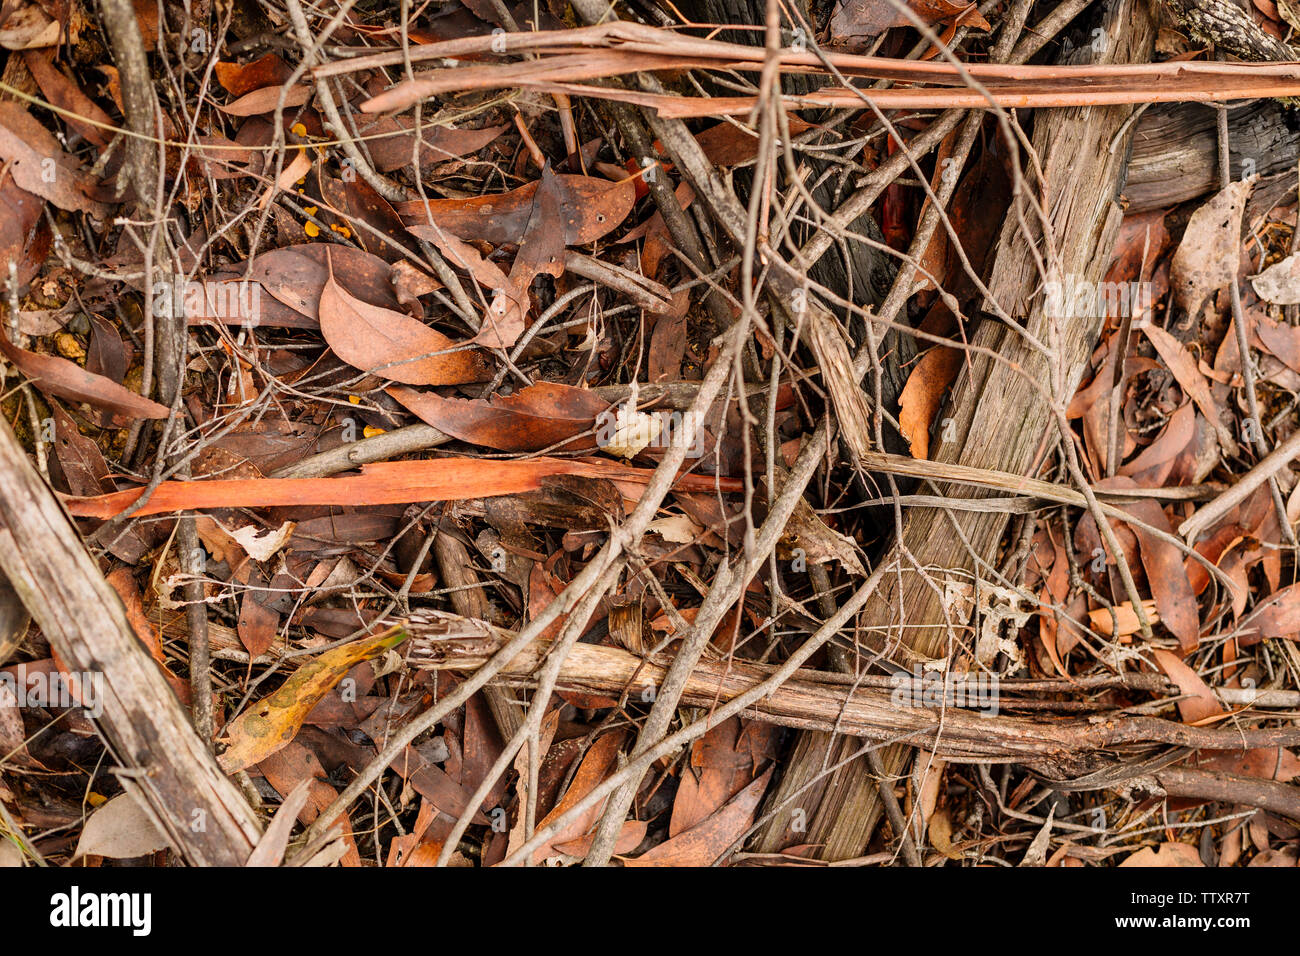 Close up image of the ground / floor of a forest with sticks, twigs, leaves of oranges, browns, greys and whites Stock Photo